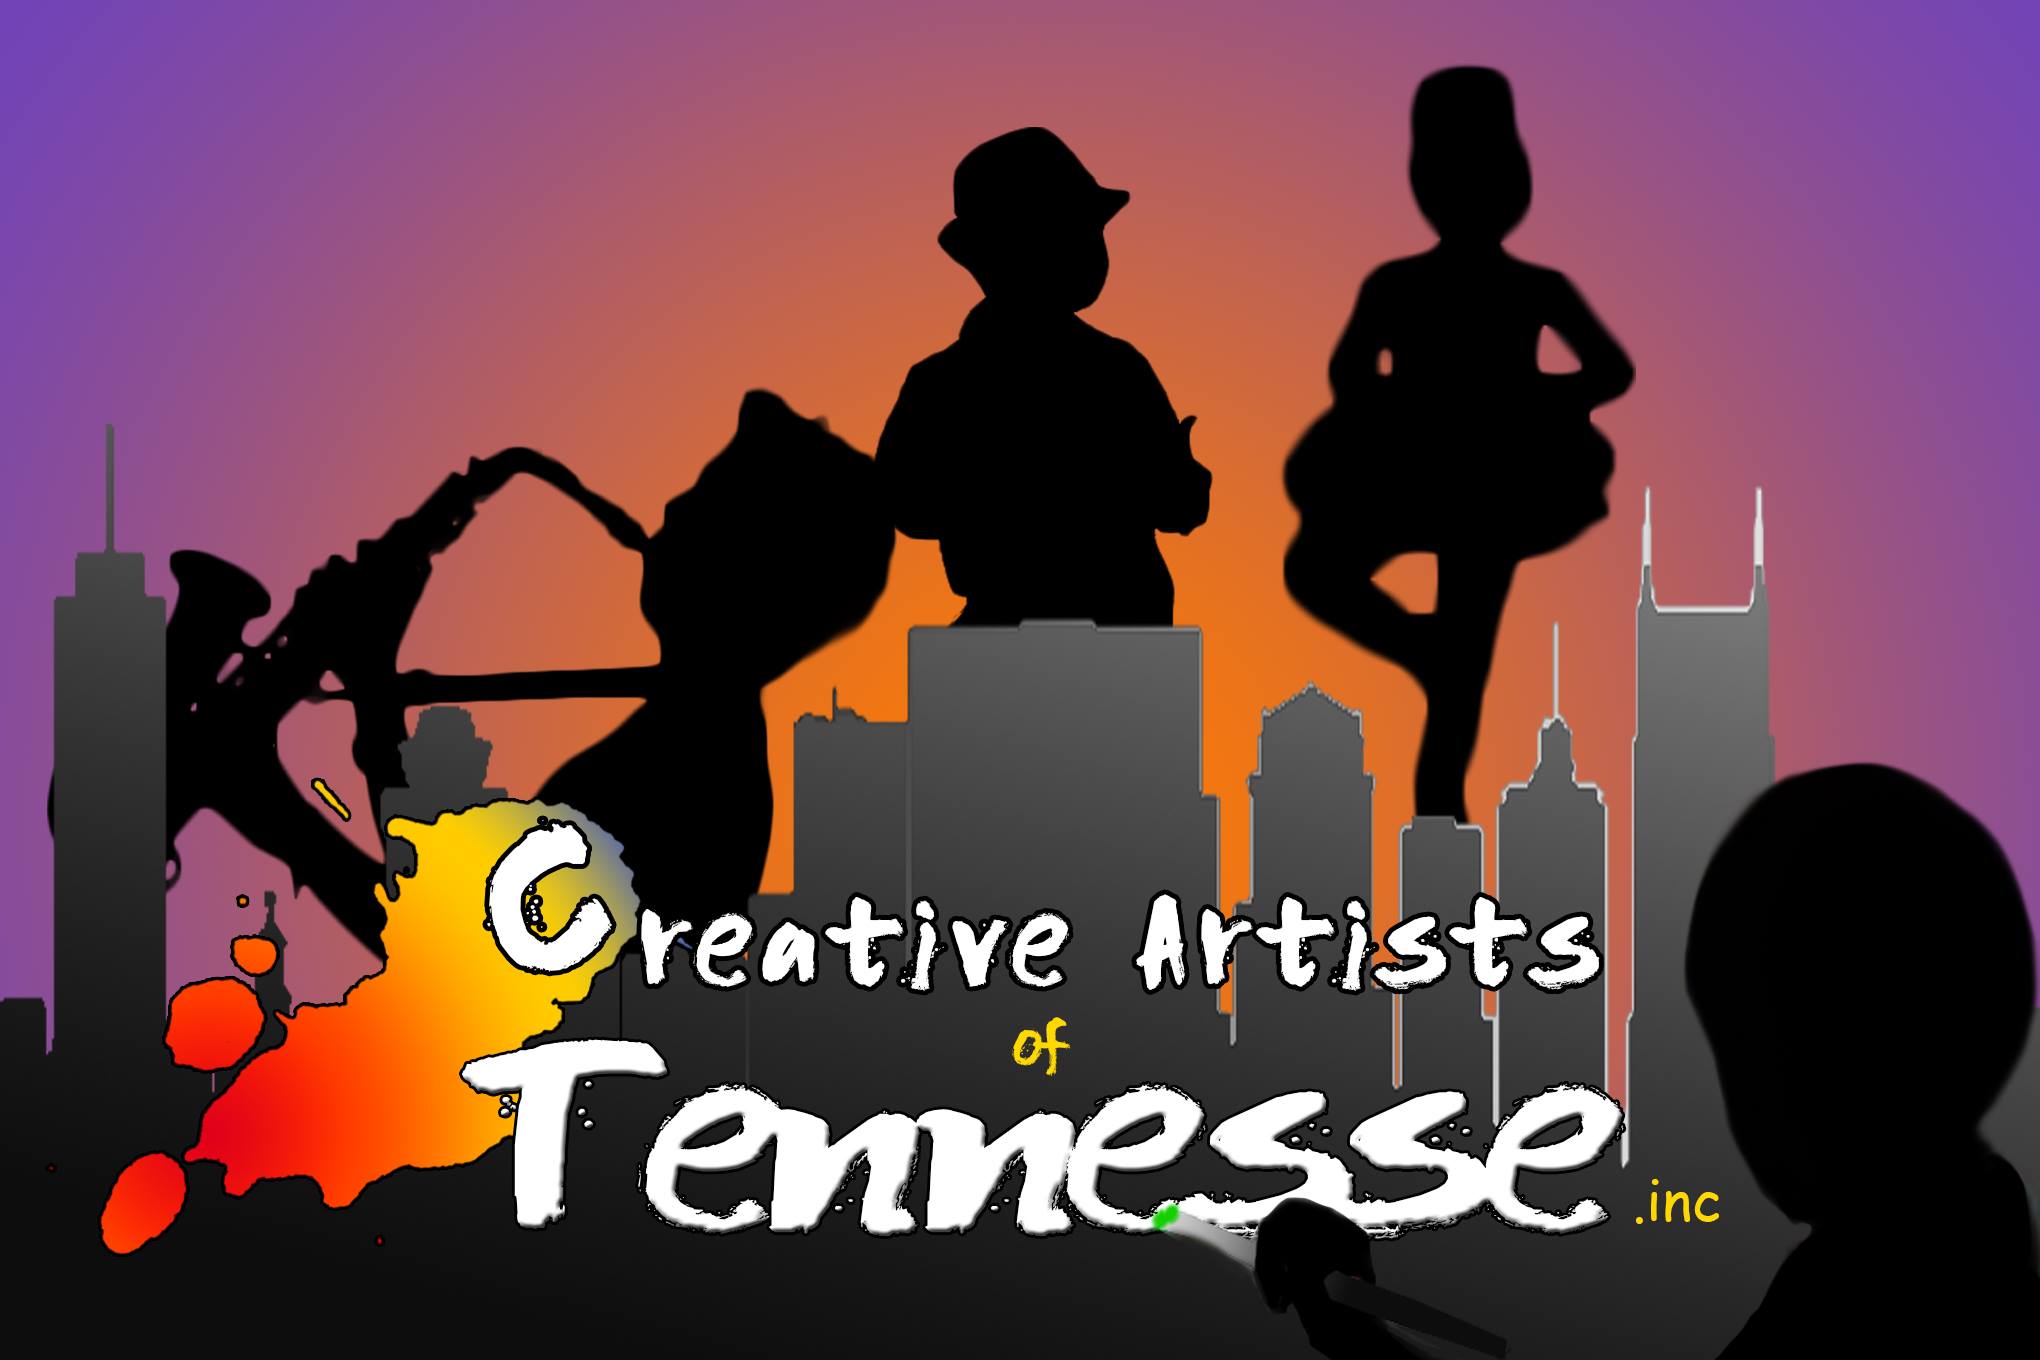 Nonprofit Creative Artists of Tennessee Looking for Committee Members